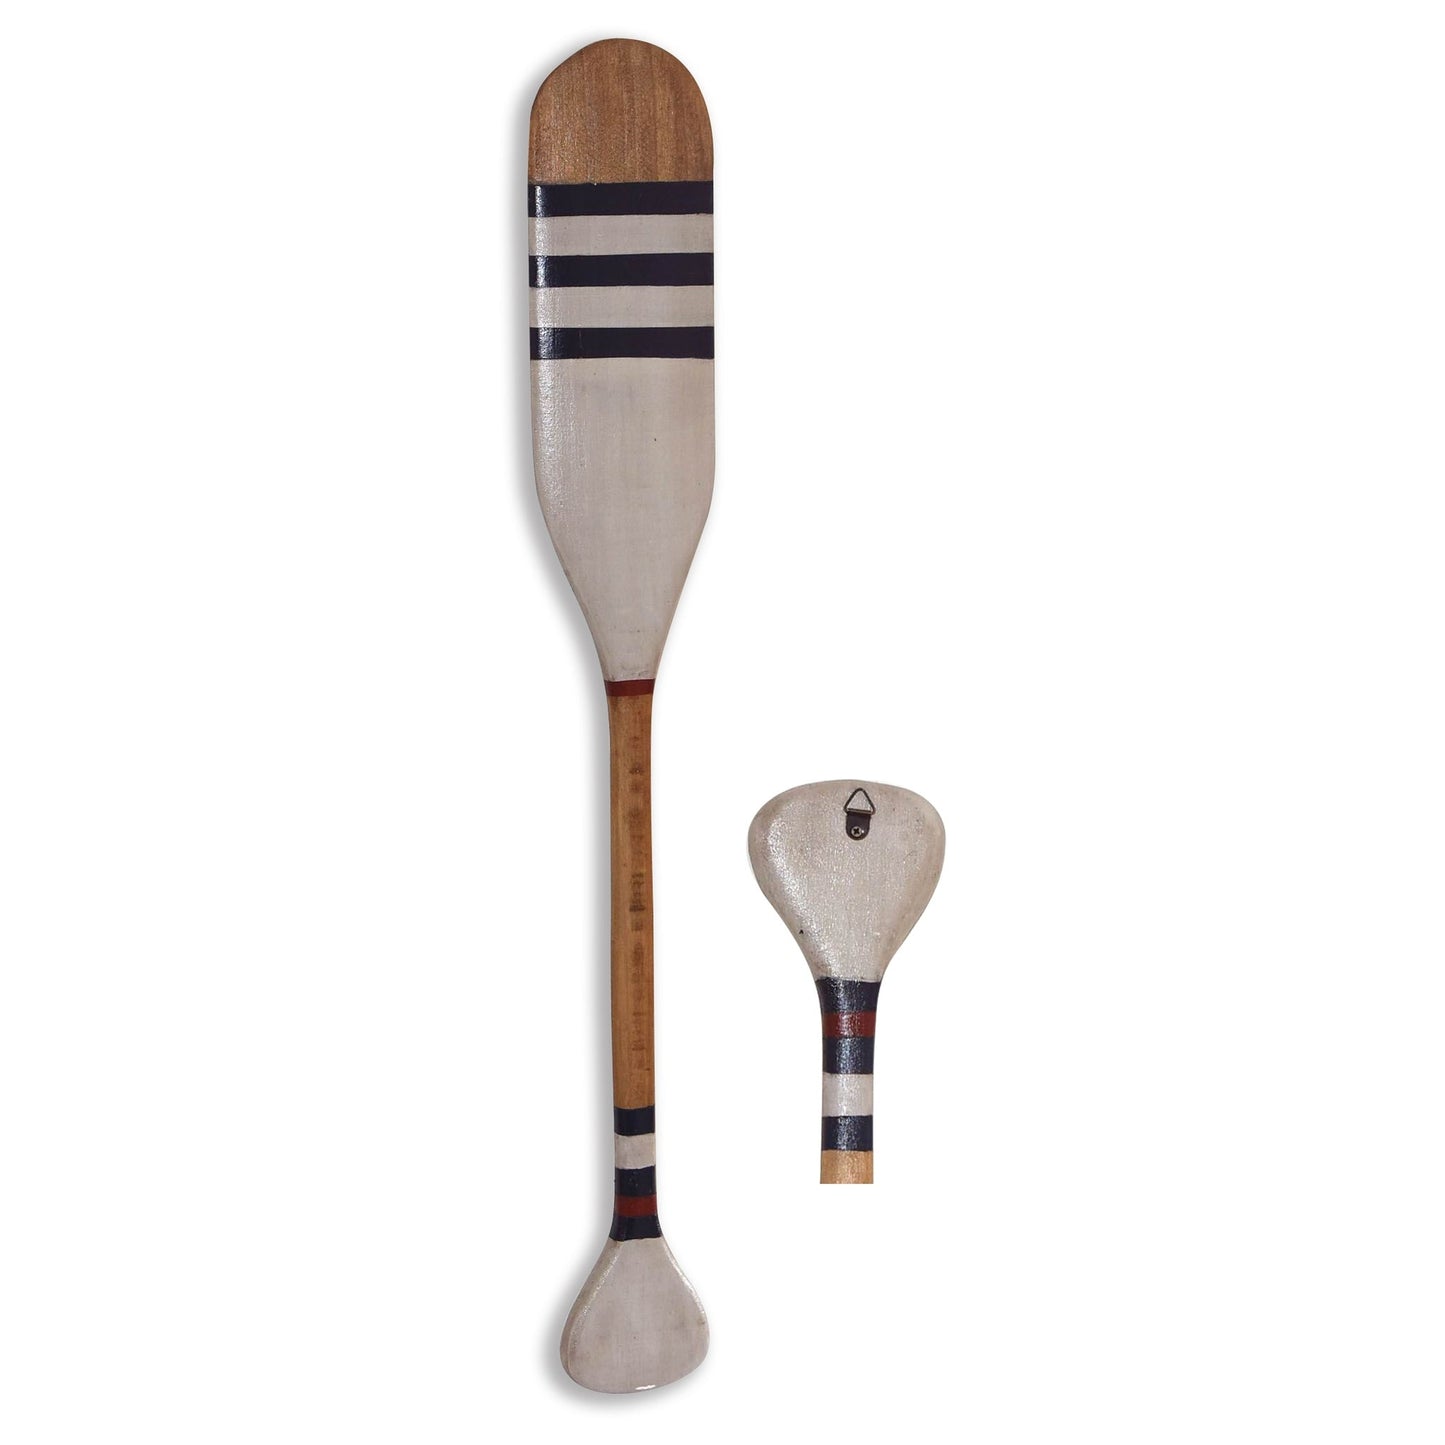 40% Off, Wooden Paddle 70cm